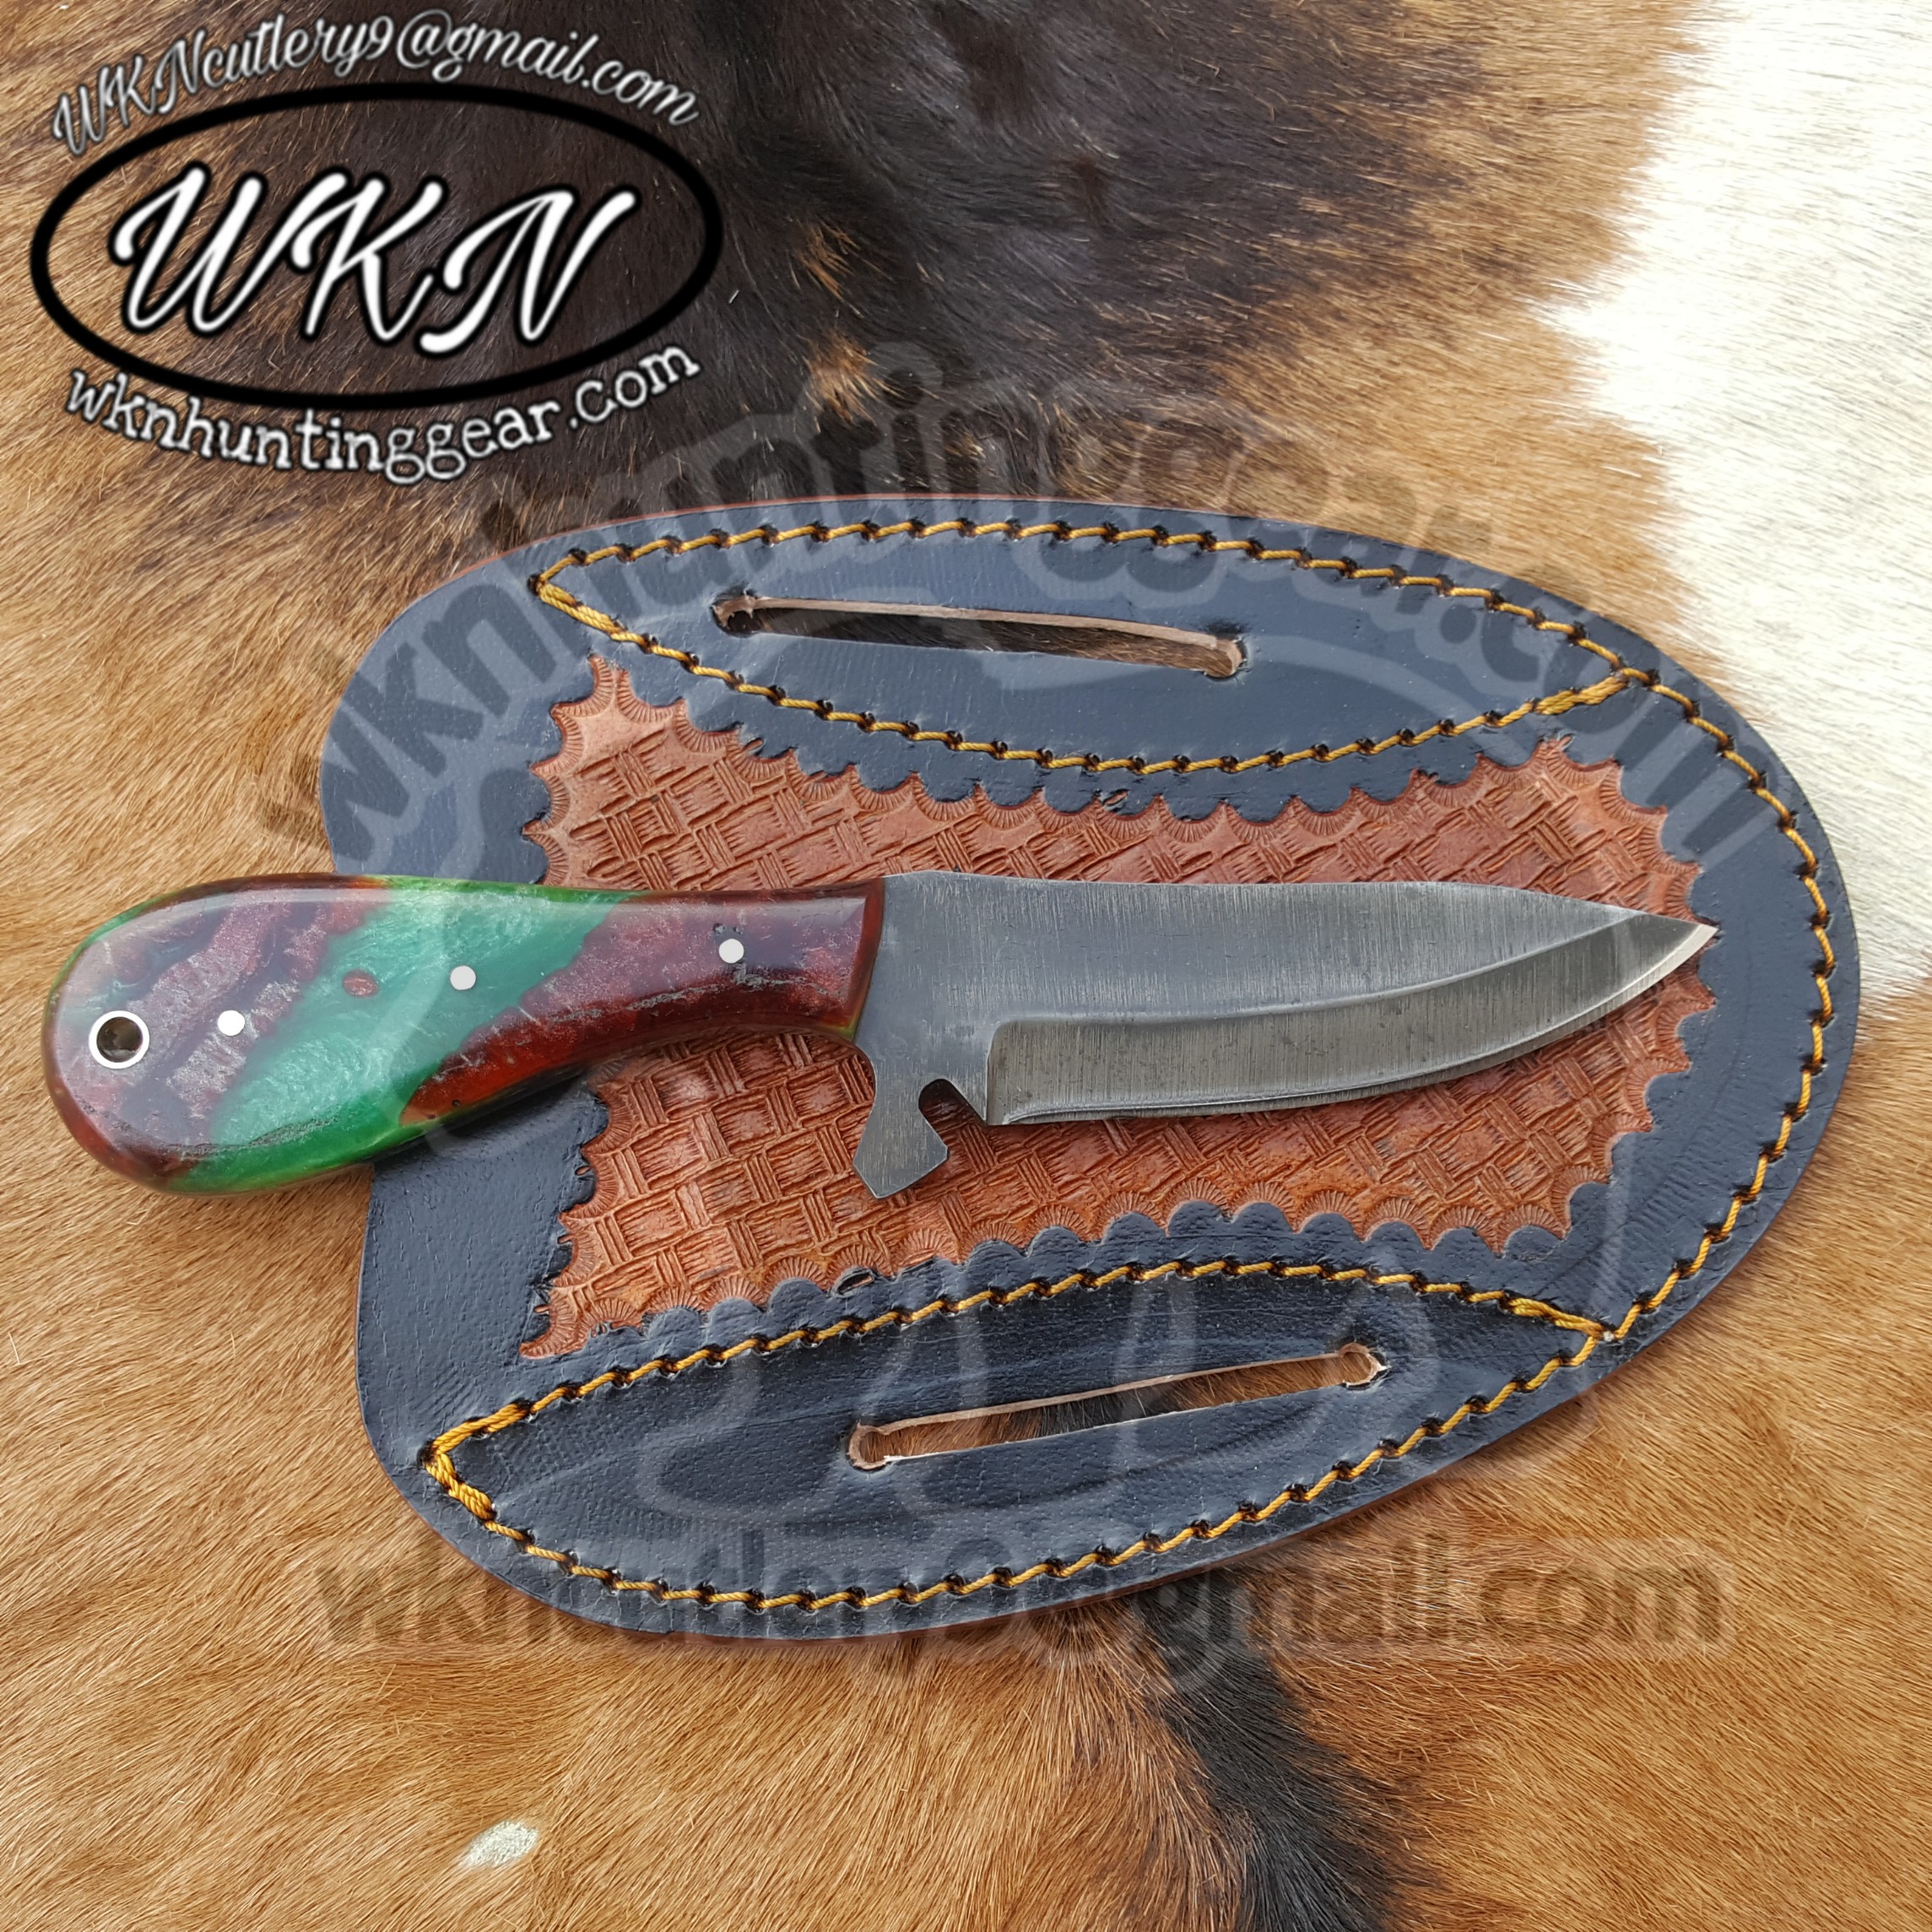 Custom Made Damascus Steel Fixed Blades Cowboy knife with Handmade Right  Hand Leather Sheath - WKN Hunting Gears